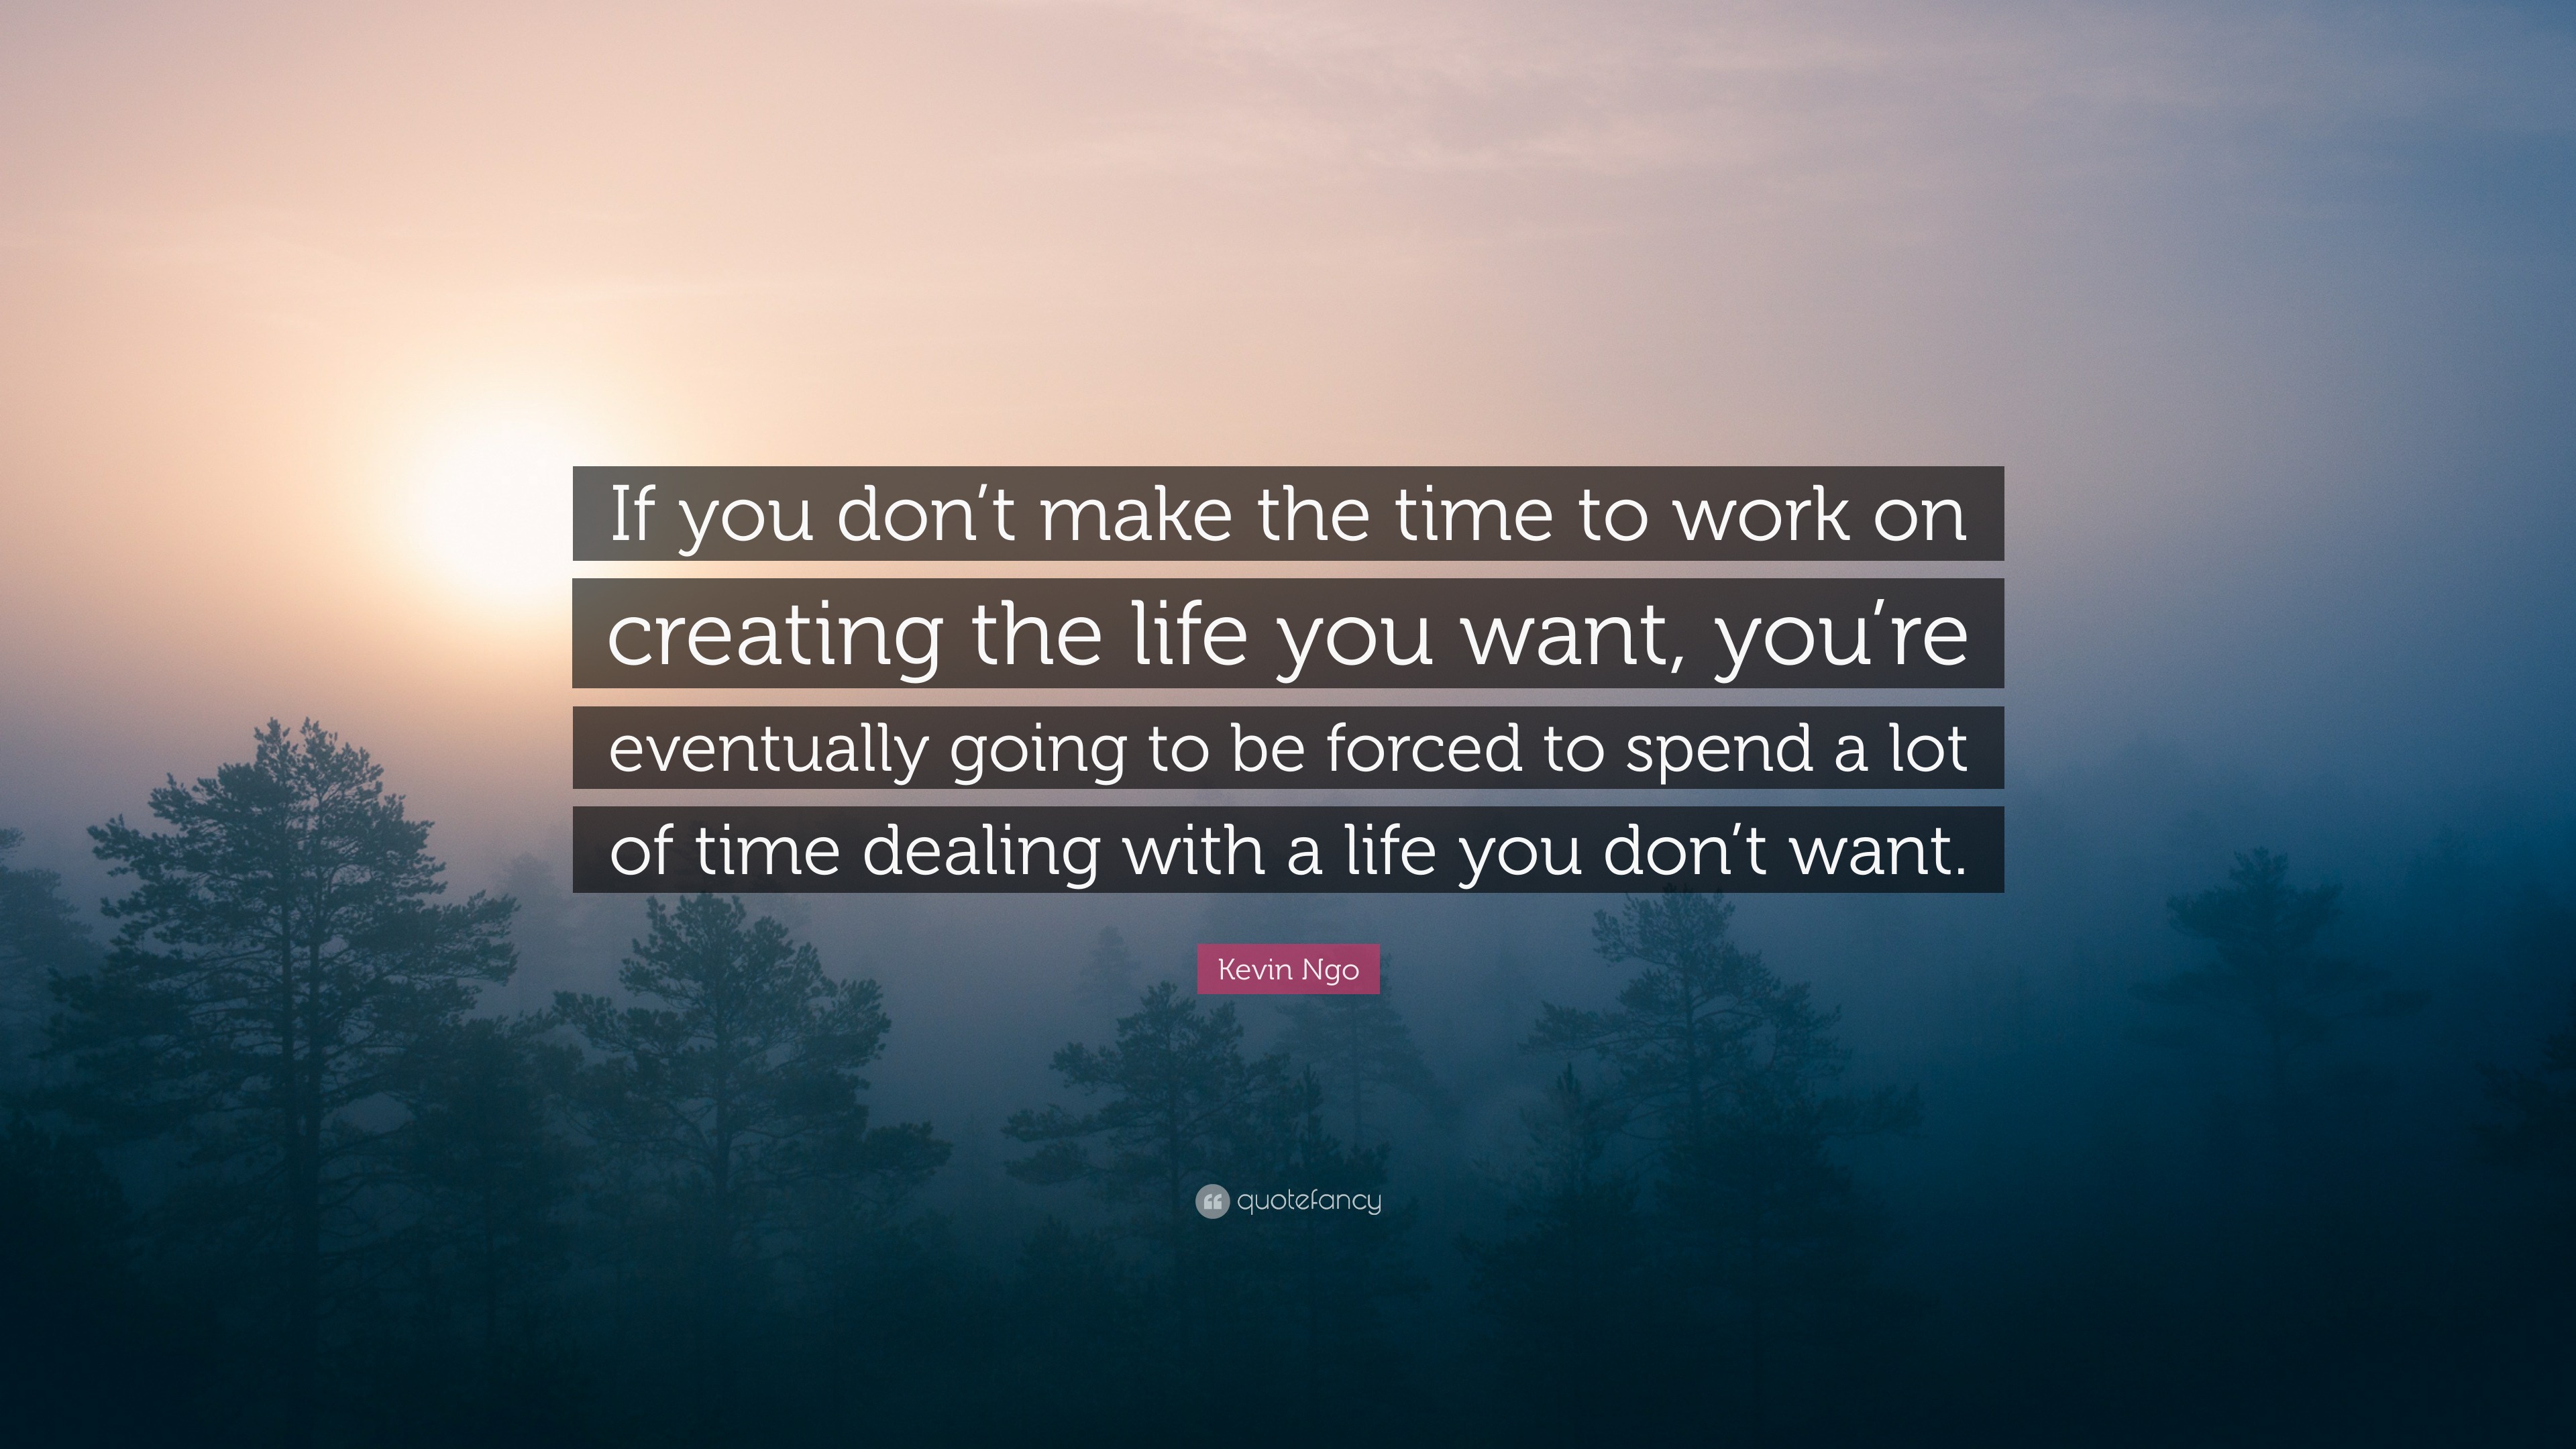 https://quotefancy.com/media/wallpaper/3840x2160/2004044-Kevin-Ngo-Quote-If-you-don-t-make-the-time-to-work-on-creating-the.jpg